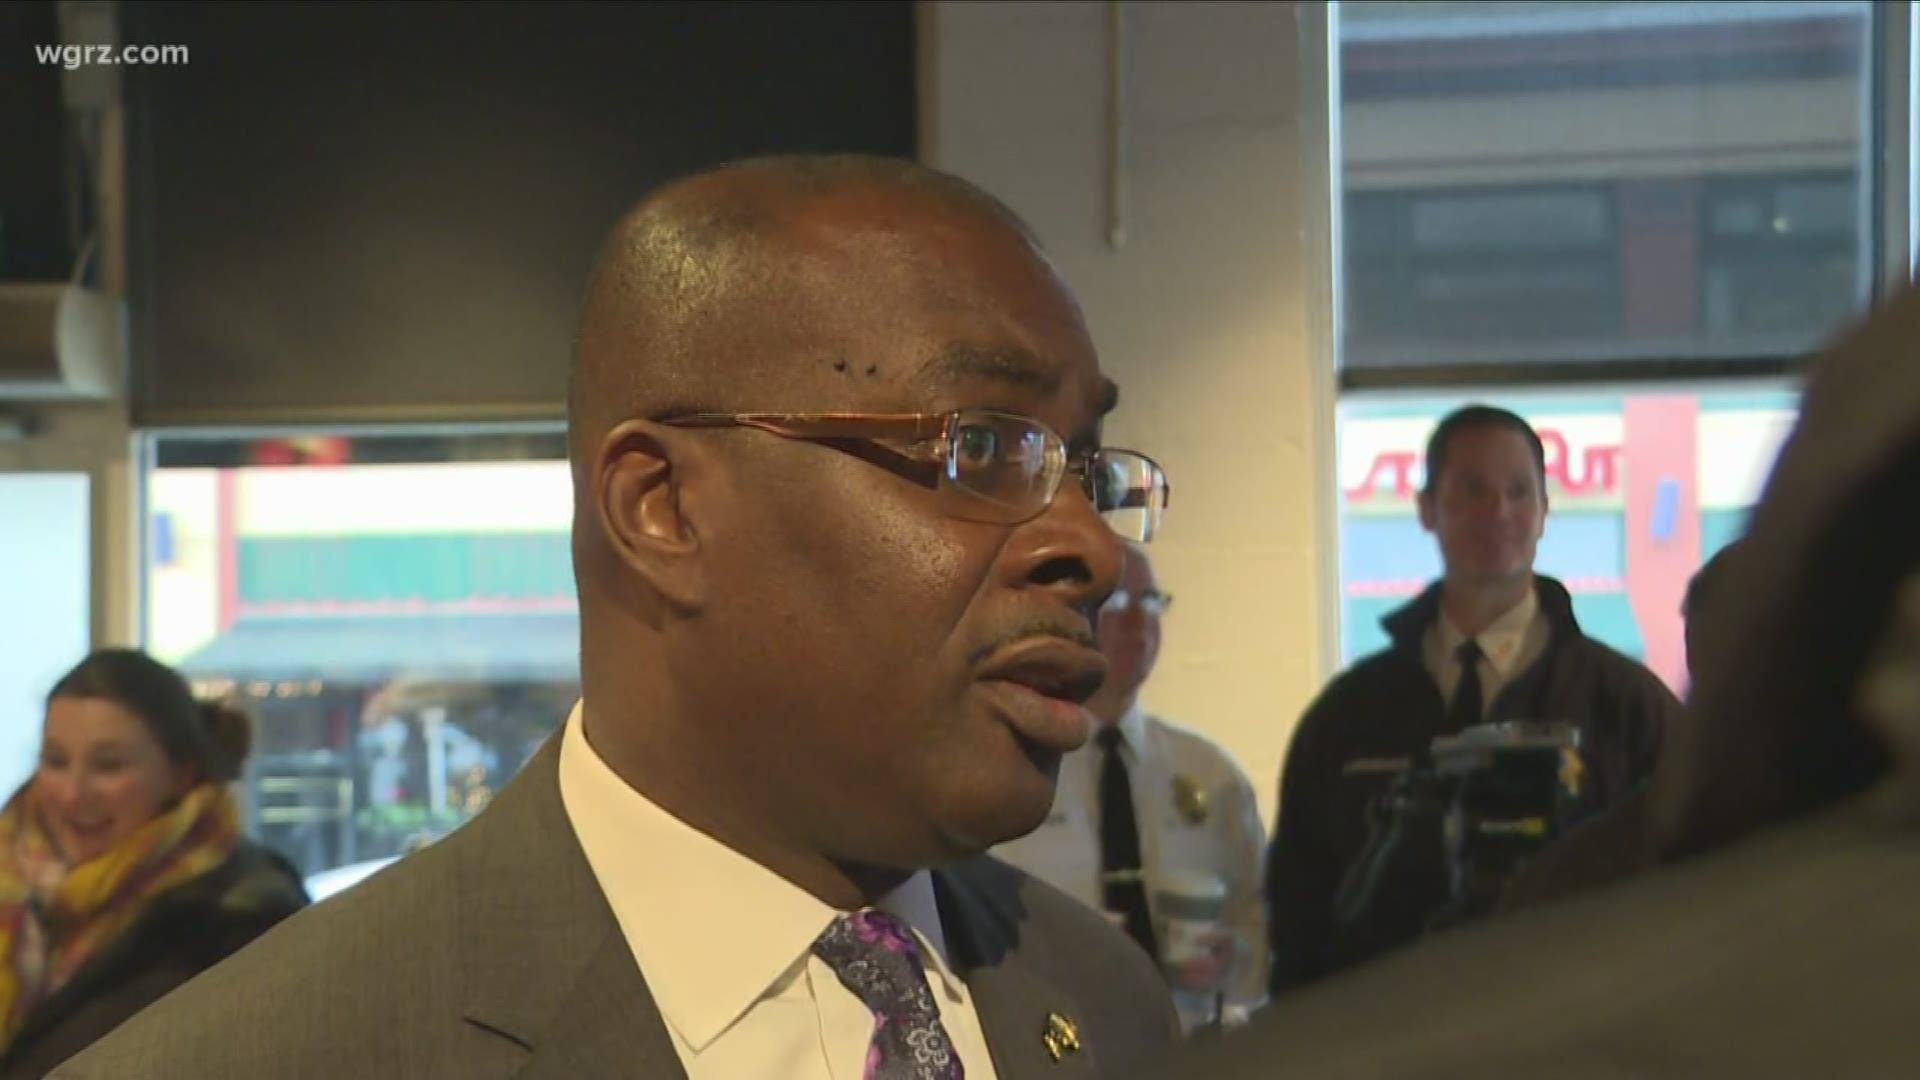 MAYOR BROWN SAYS THE NEW JERSEY BUSINESSMAN SHOULD NOT BE ALLOWED TO OWN PROPERTY IN BUFFALO...